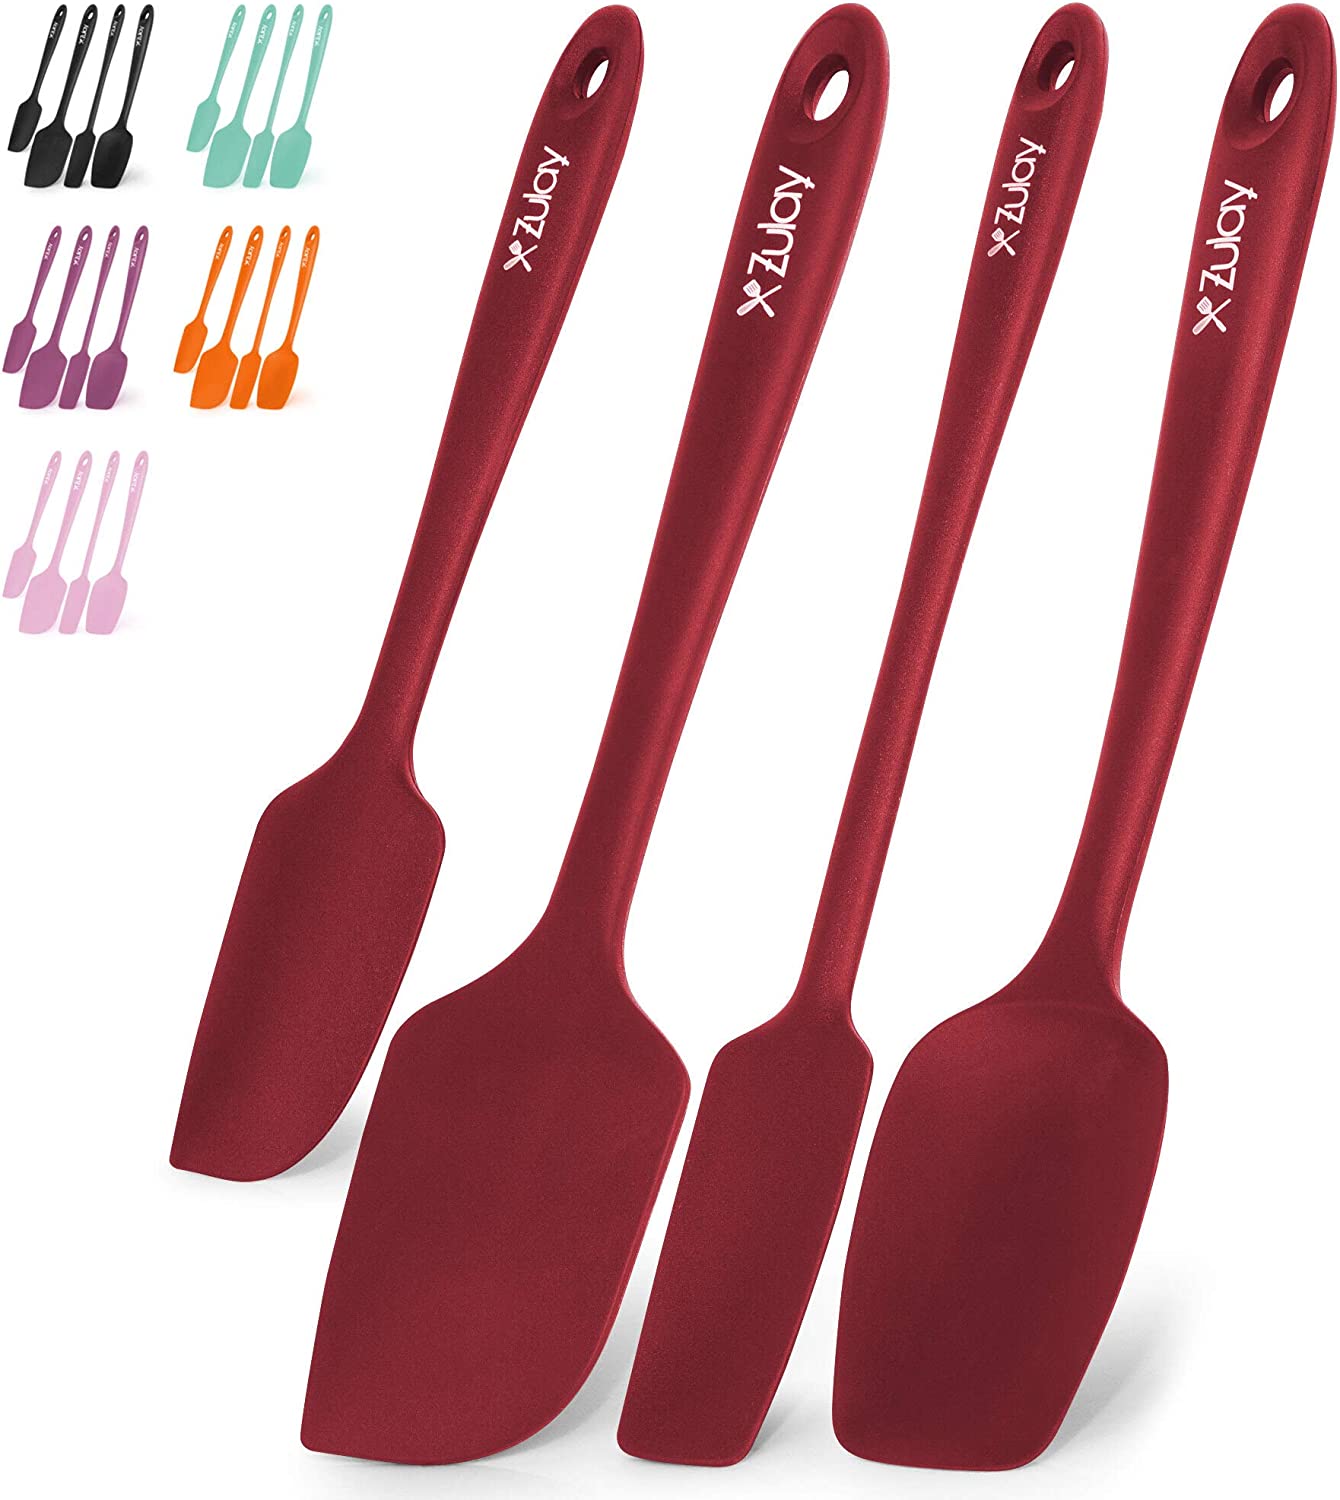 Zulay Kitchen Heat Resistant Silicone Spatula Set Tools for Cooking, Baking & Mixing